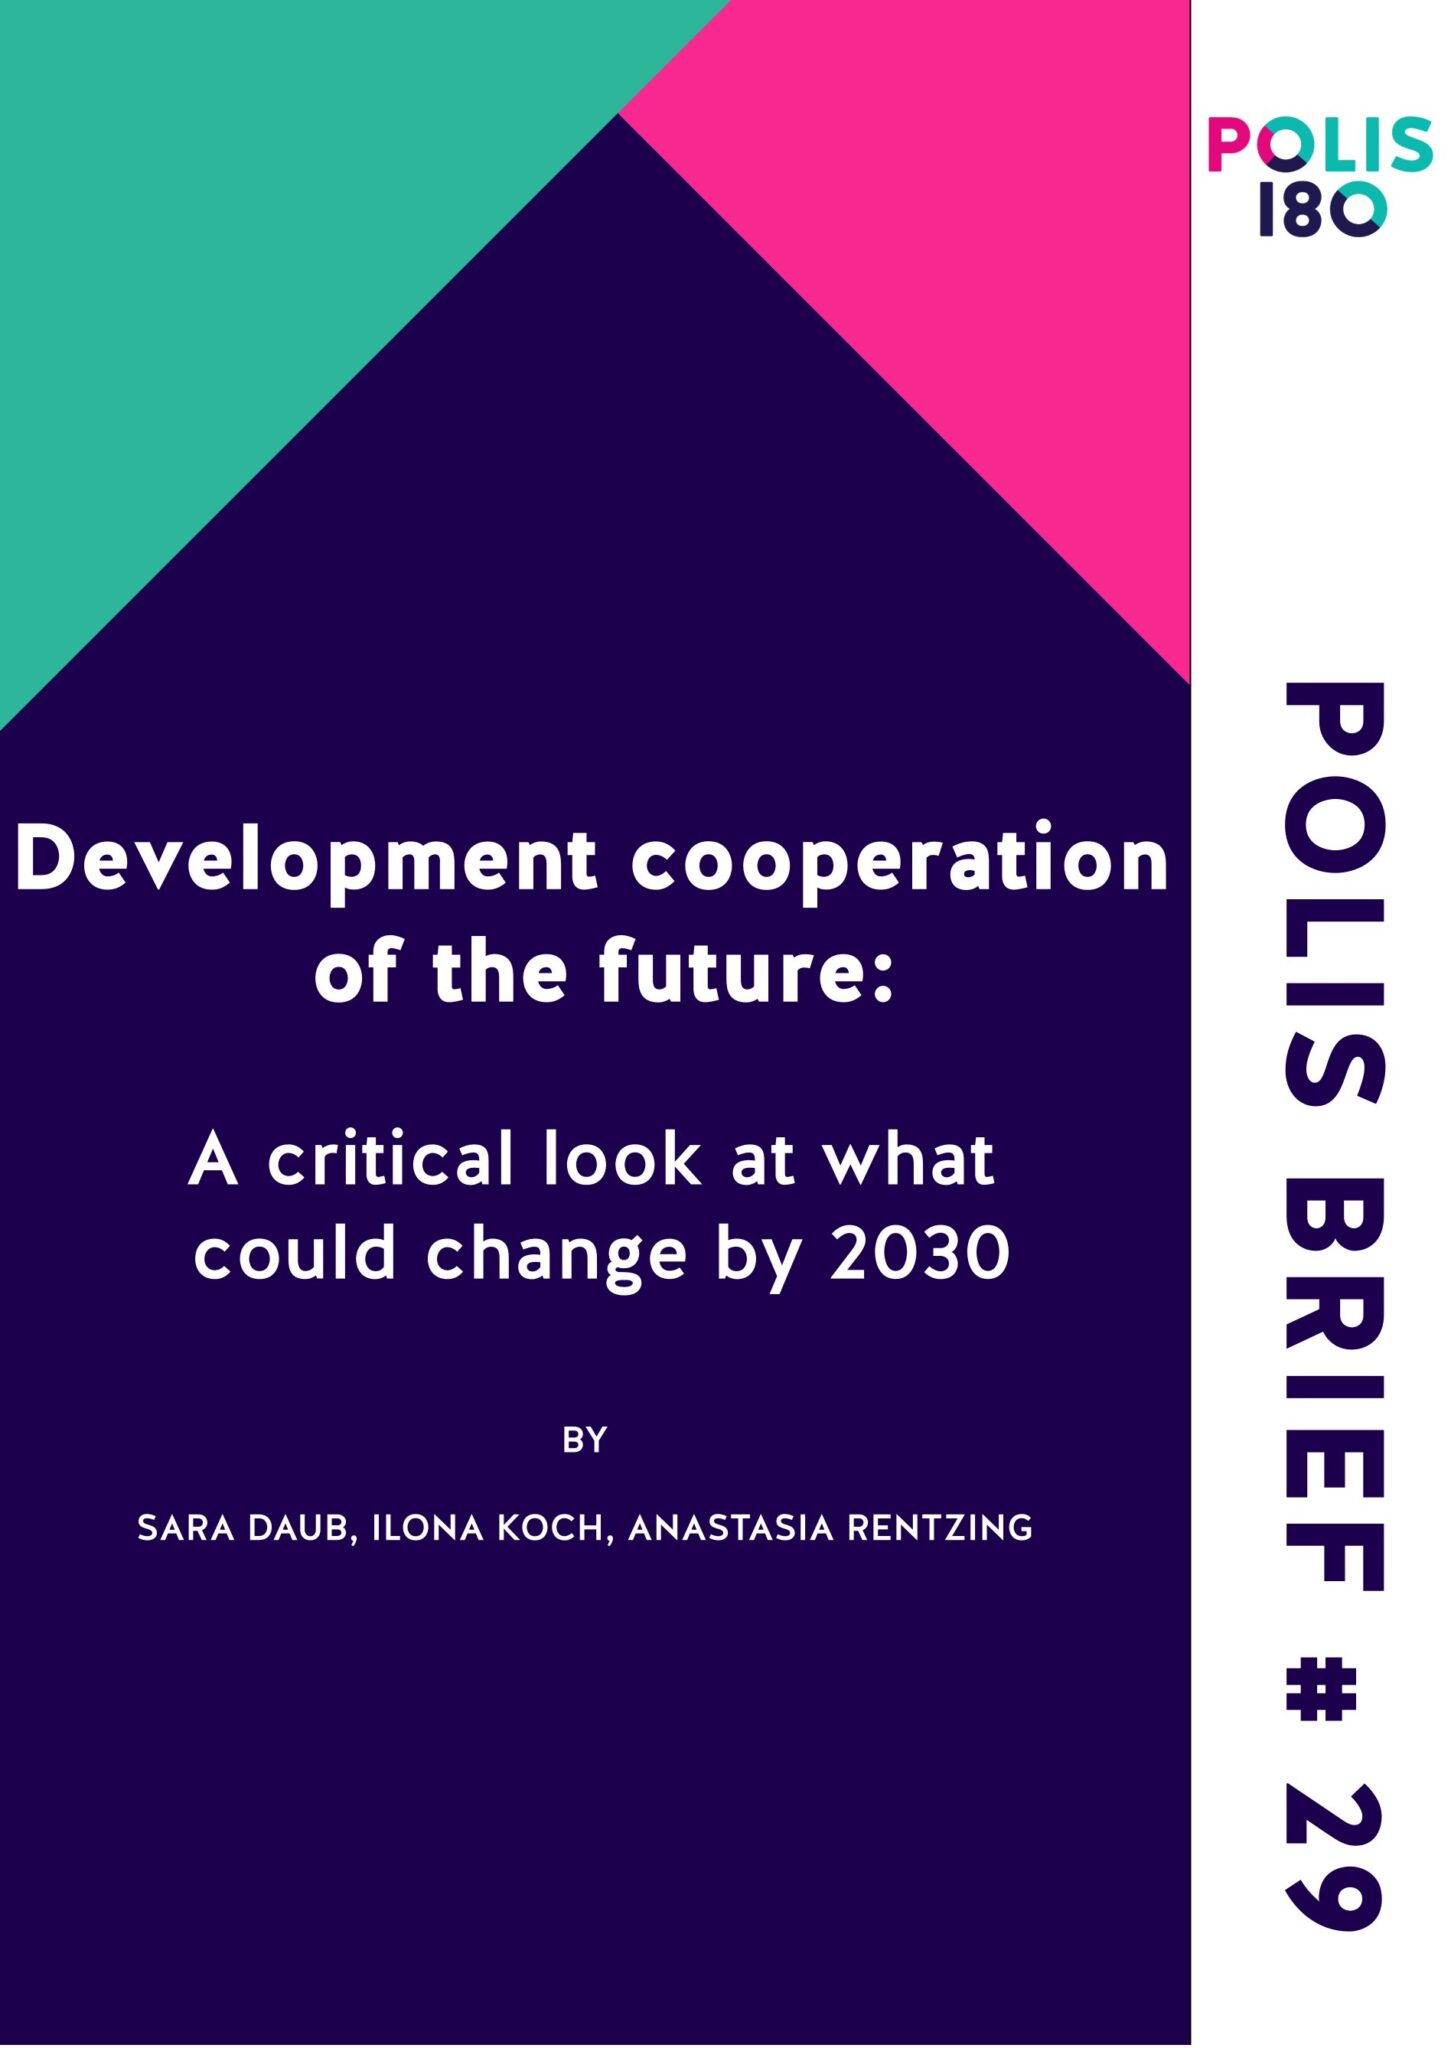 Polis Brief N° 29 - Development cooperation of the future: A critical look at what could change  by 2030